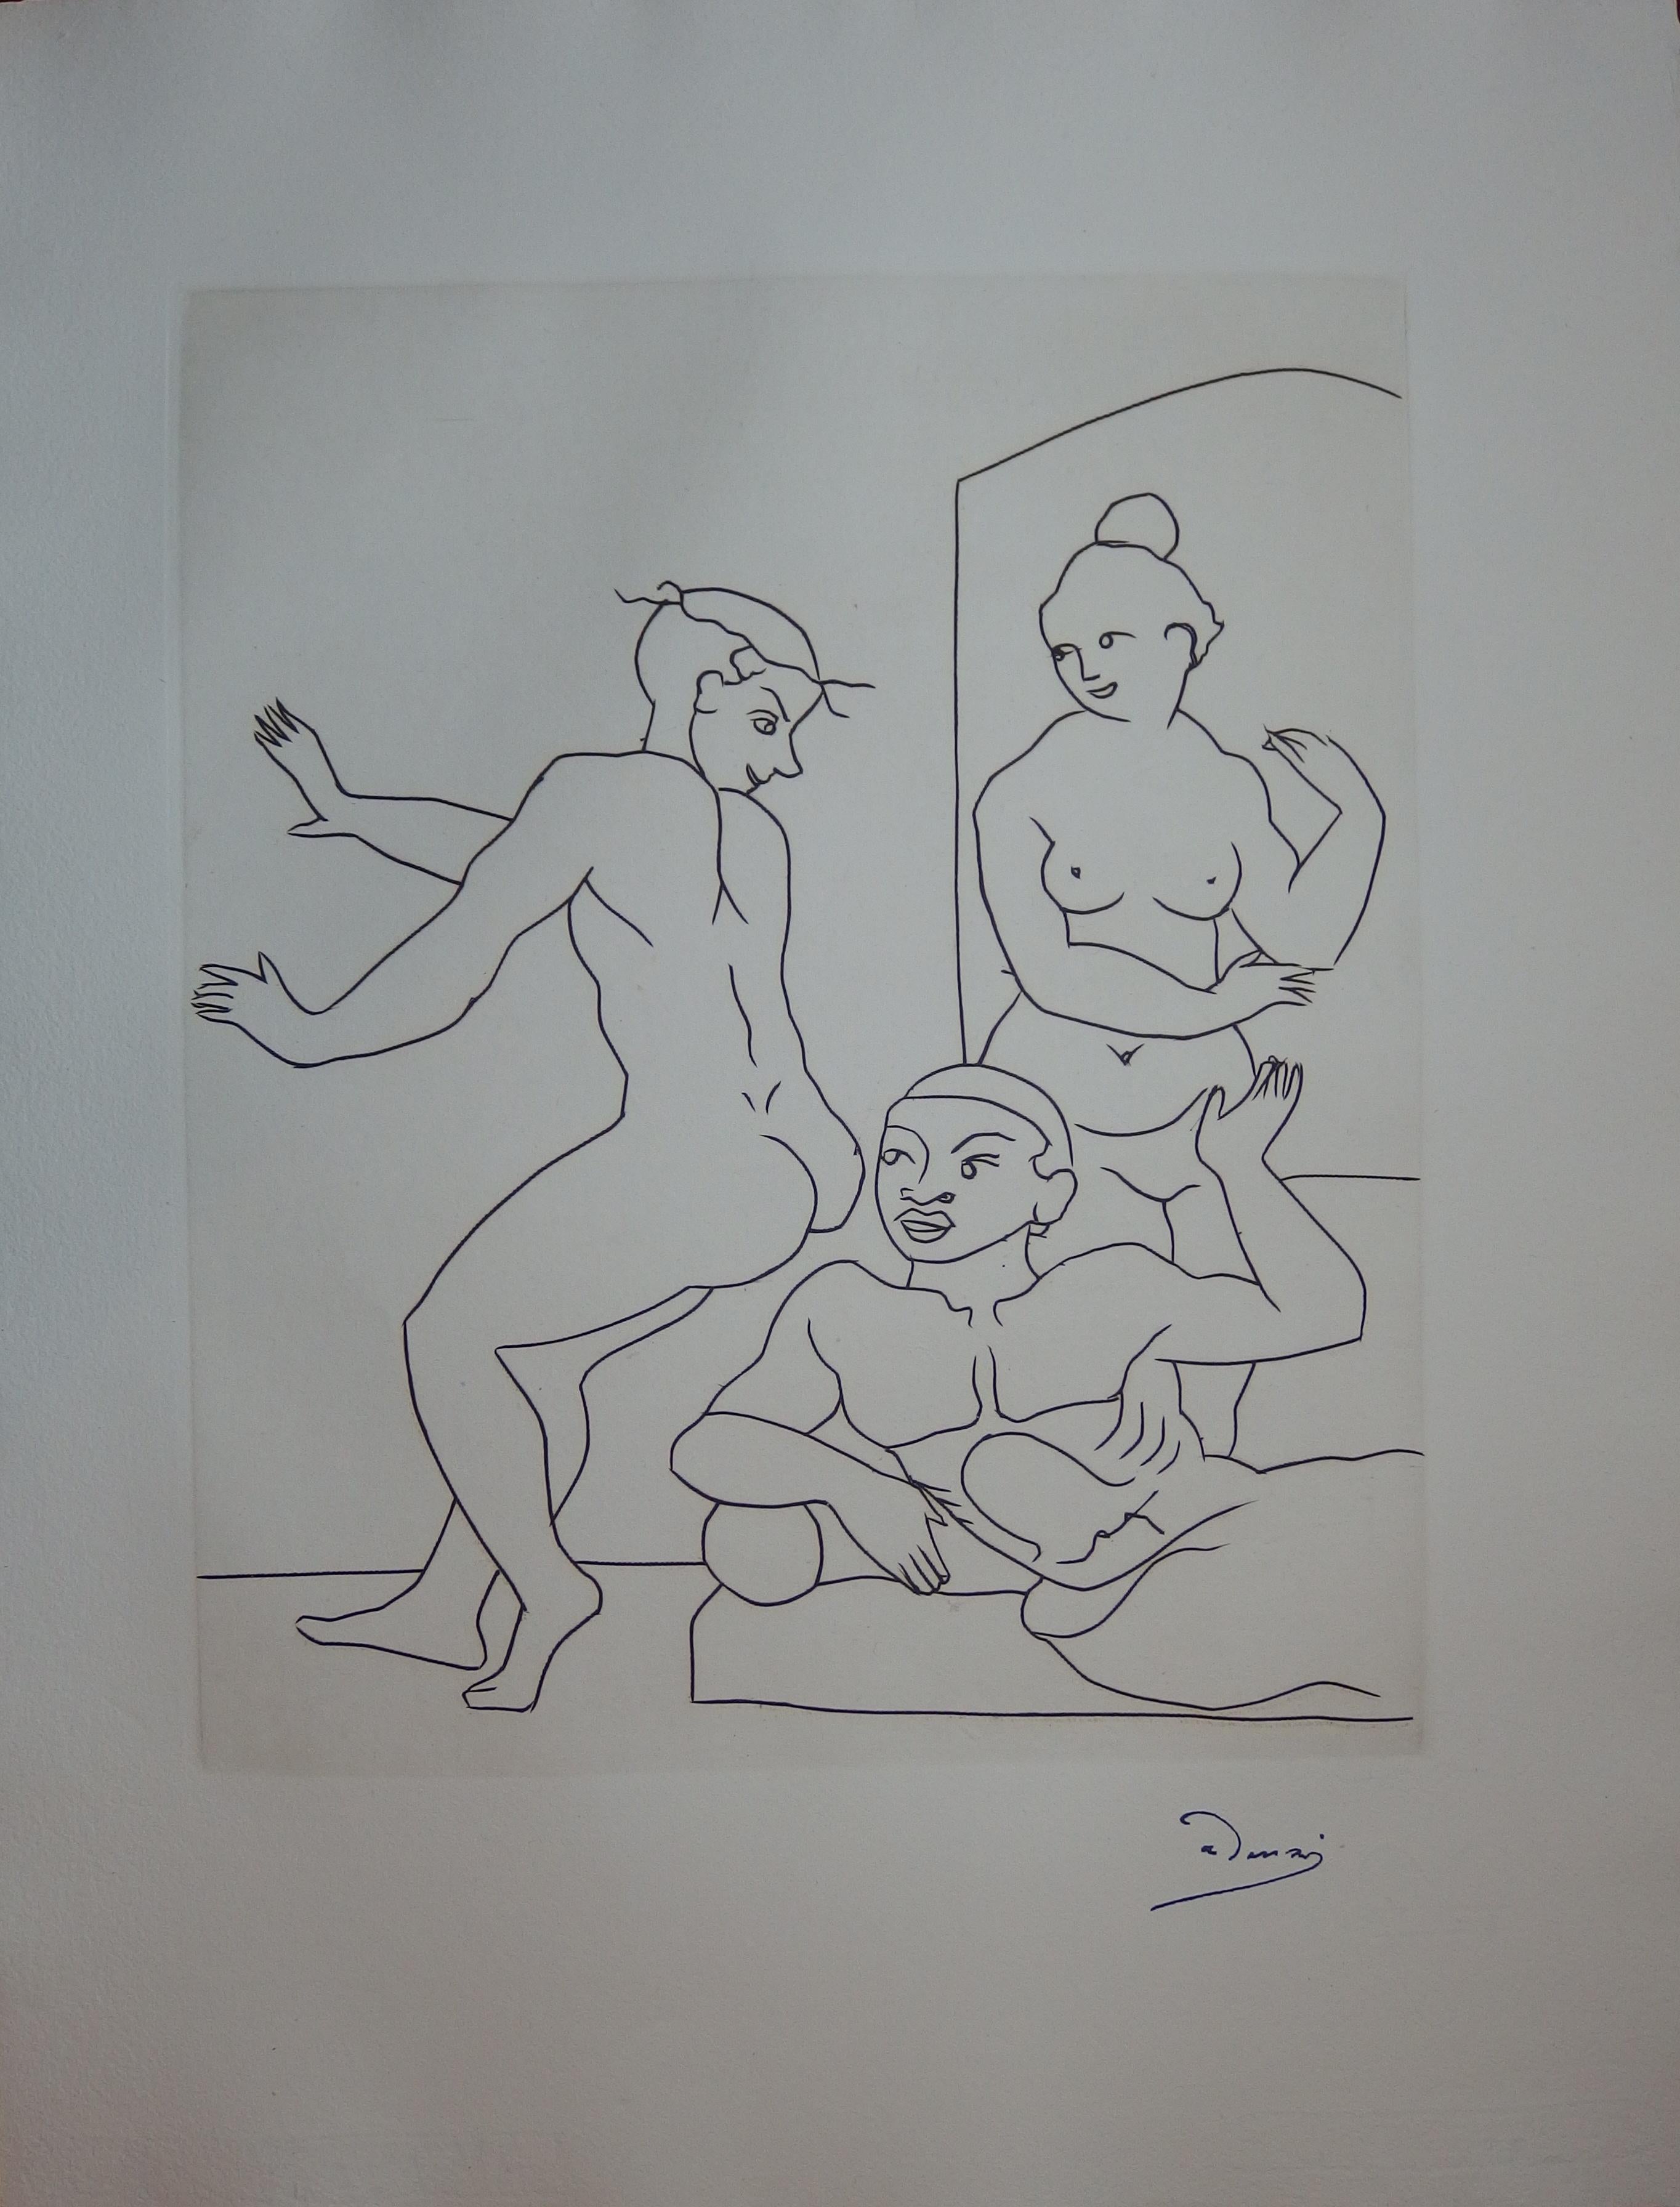 Game in the Cloakroom - Original etching - 1951